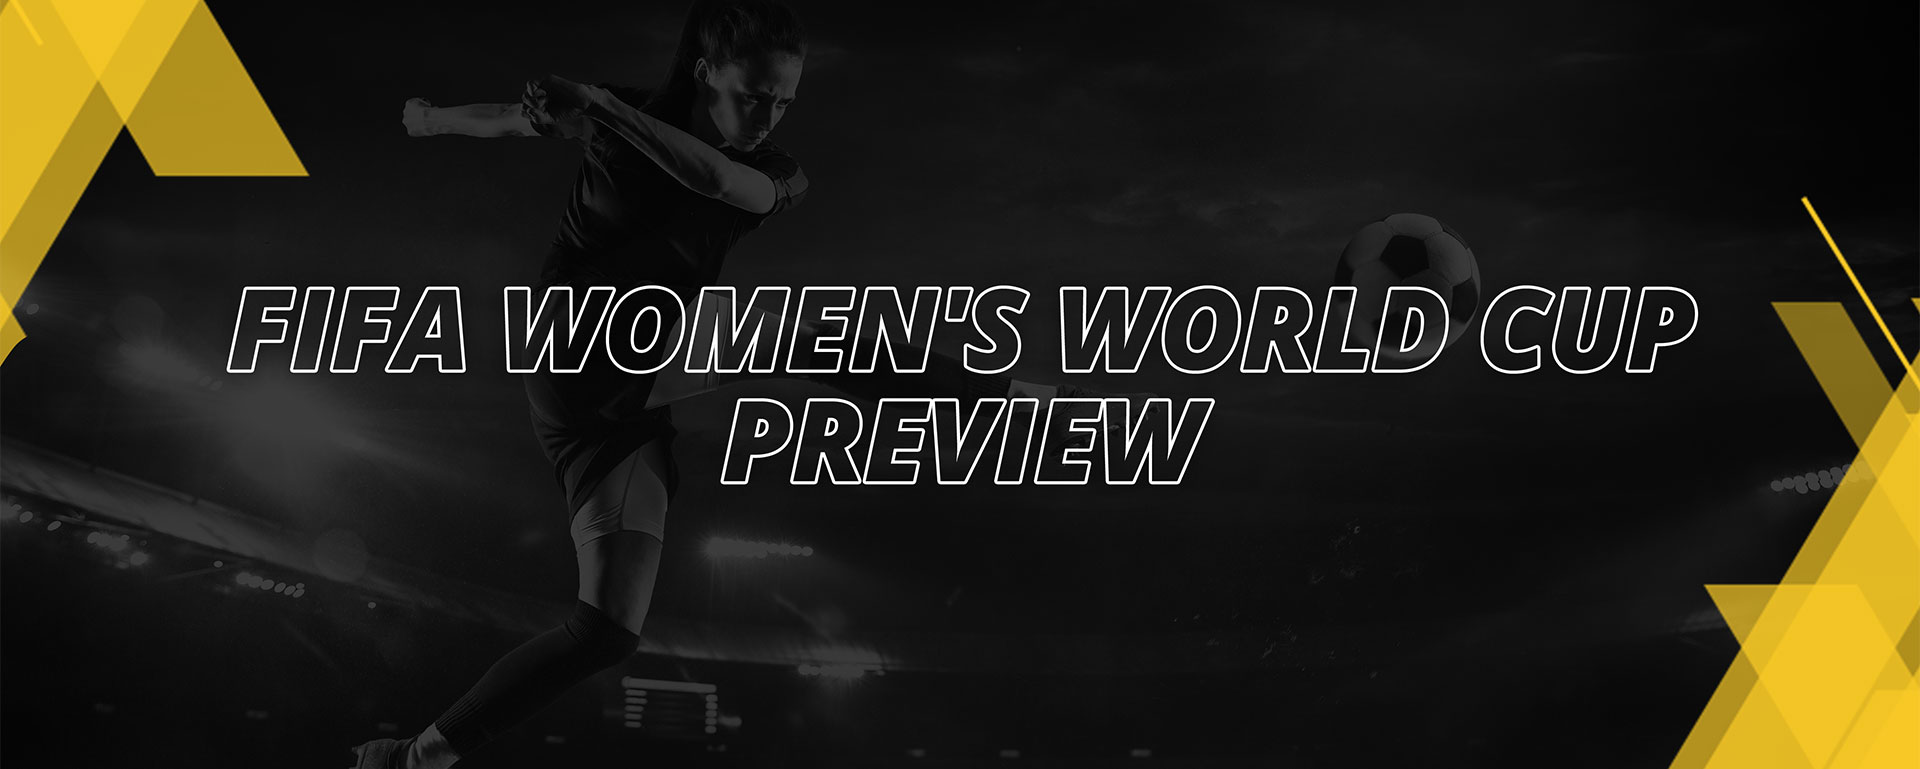 FIFA WOMEN’S WORLD CUP – PREVIEW